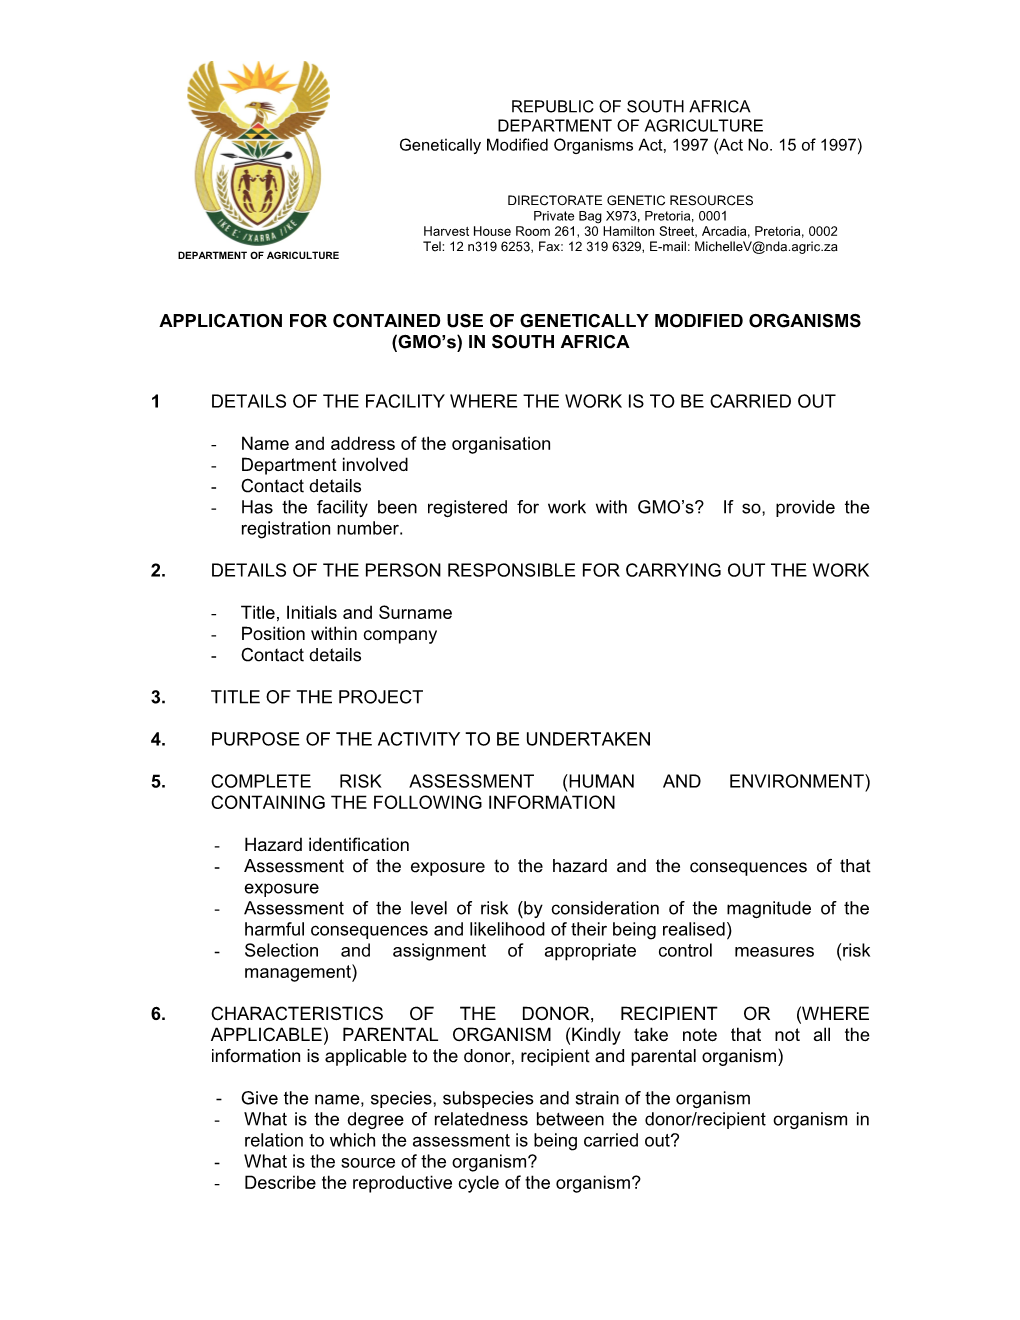 APPLICATION for CONTAINED USE of GENETICALLY MODIFIED ORGANISMS (GMO S) in SOUTH AFRICA